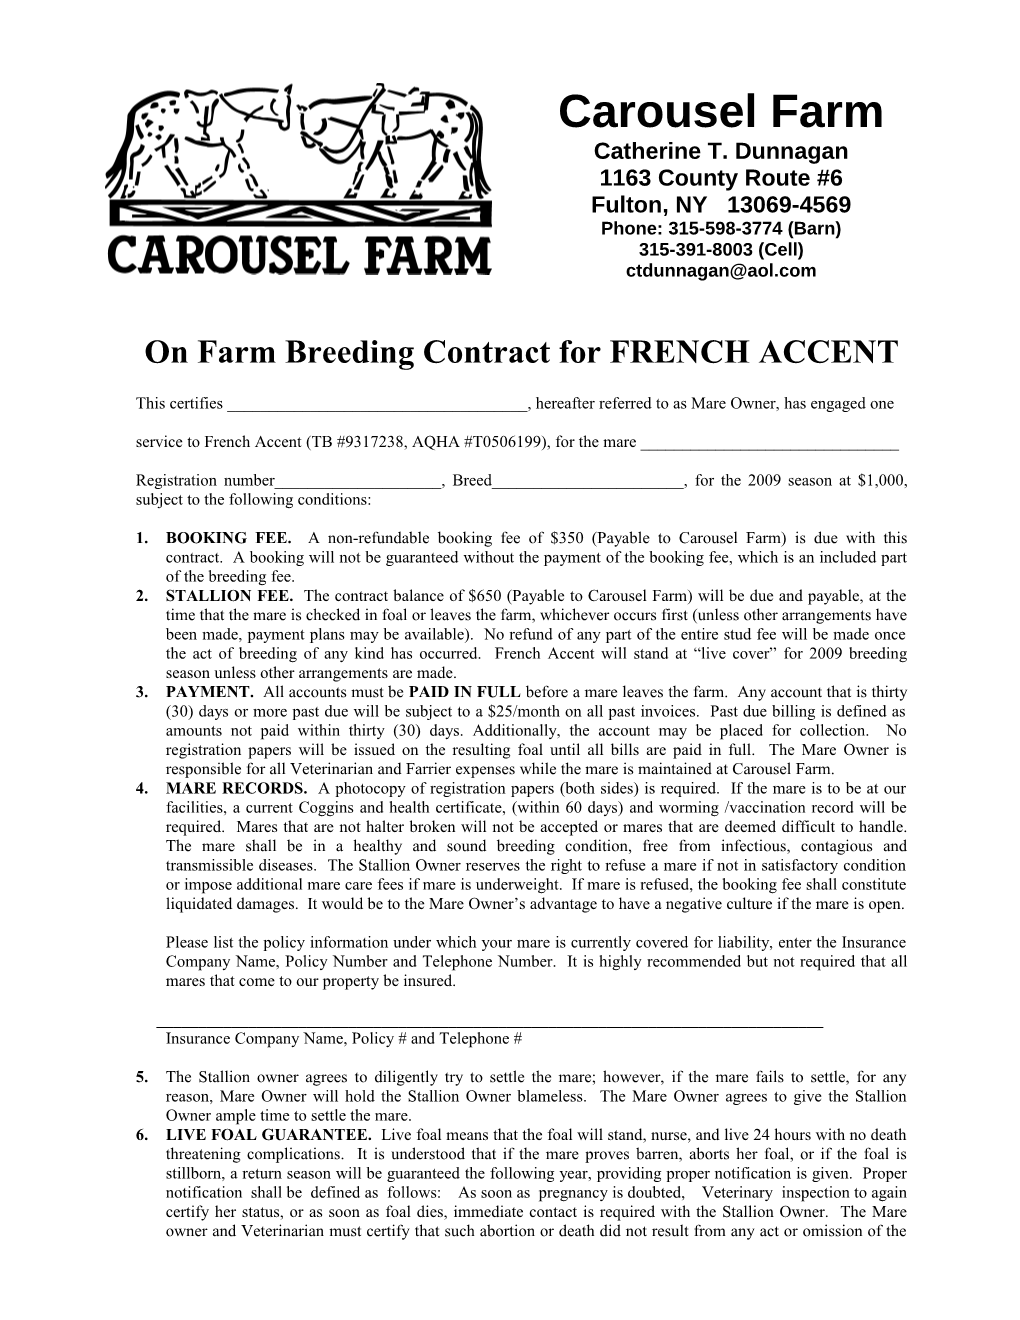 Leasing of Horse from Carousel Farm